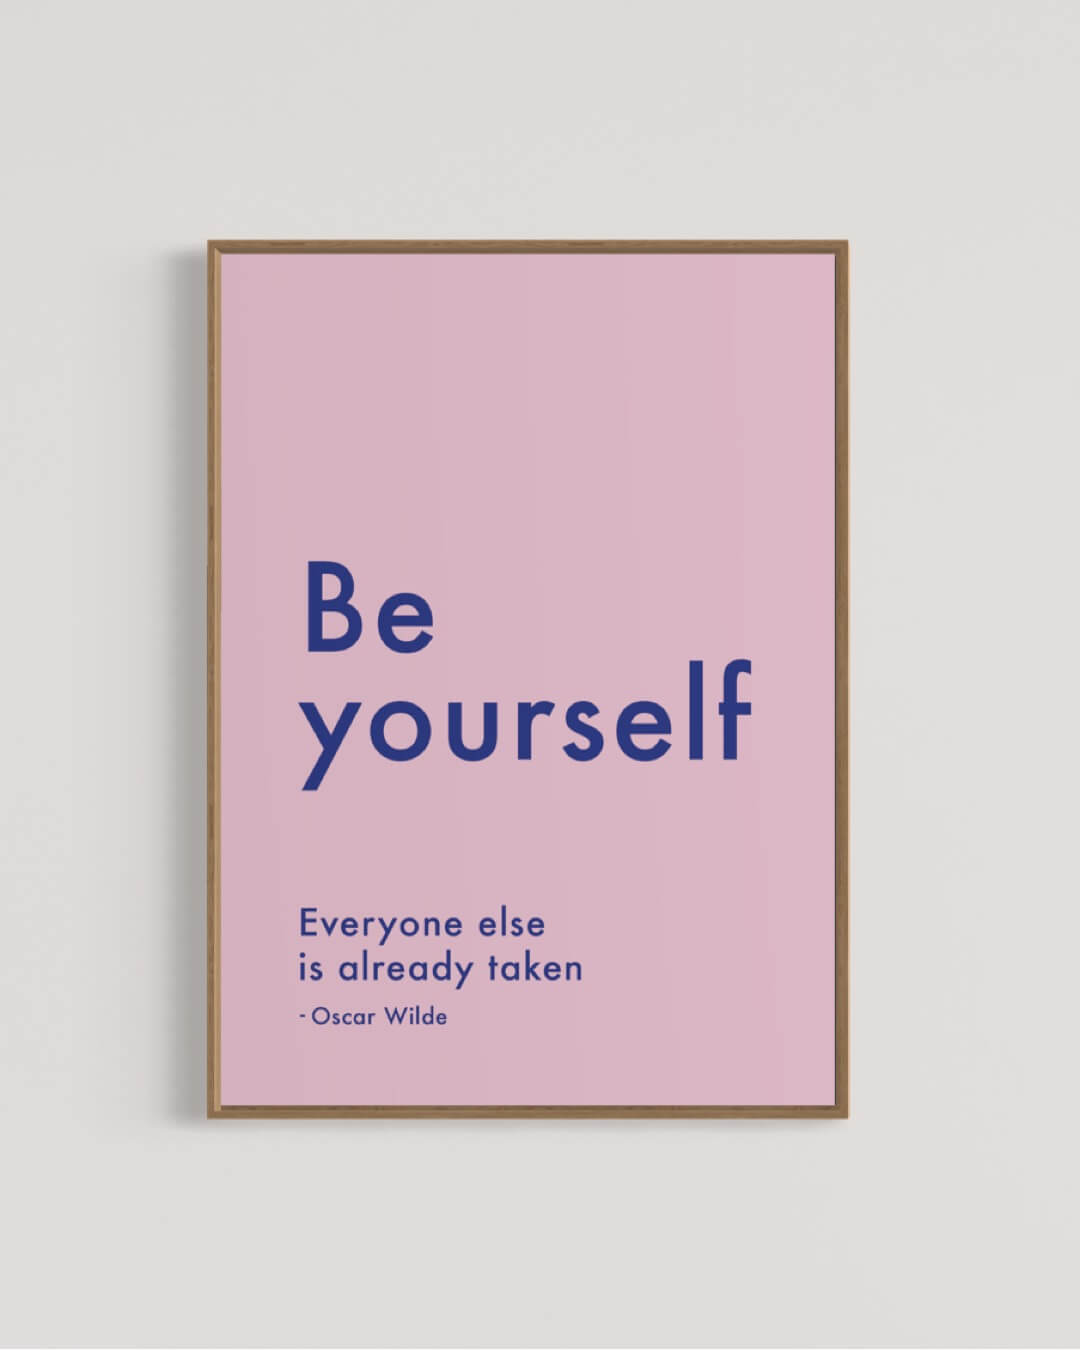 Be yourself. Everyone else is already taken. - rosa